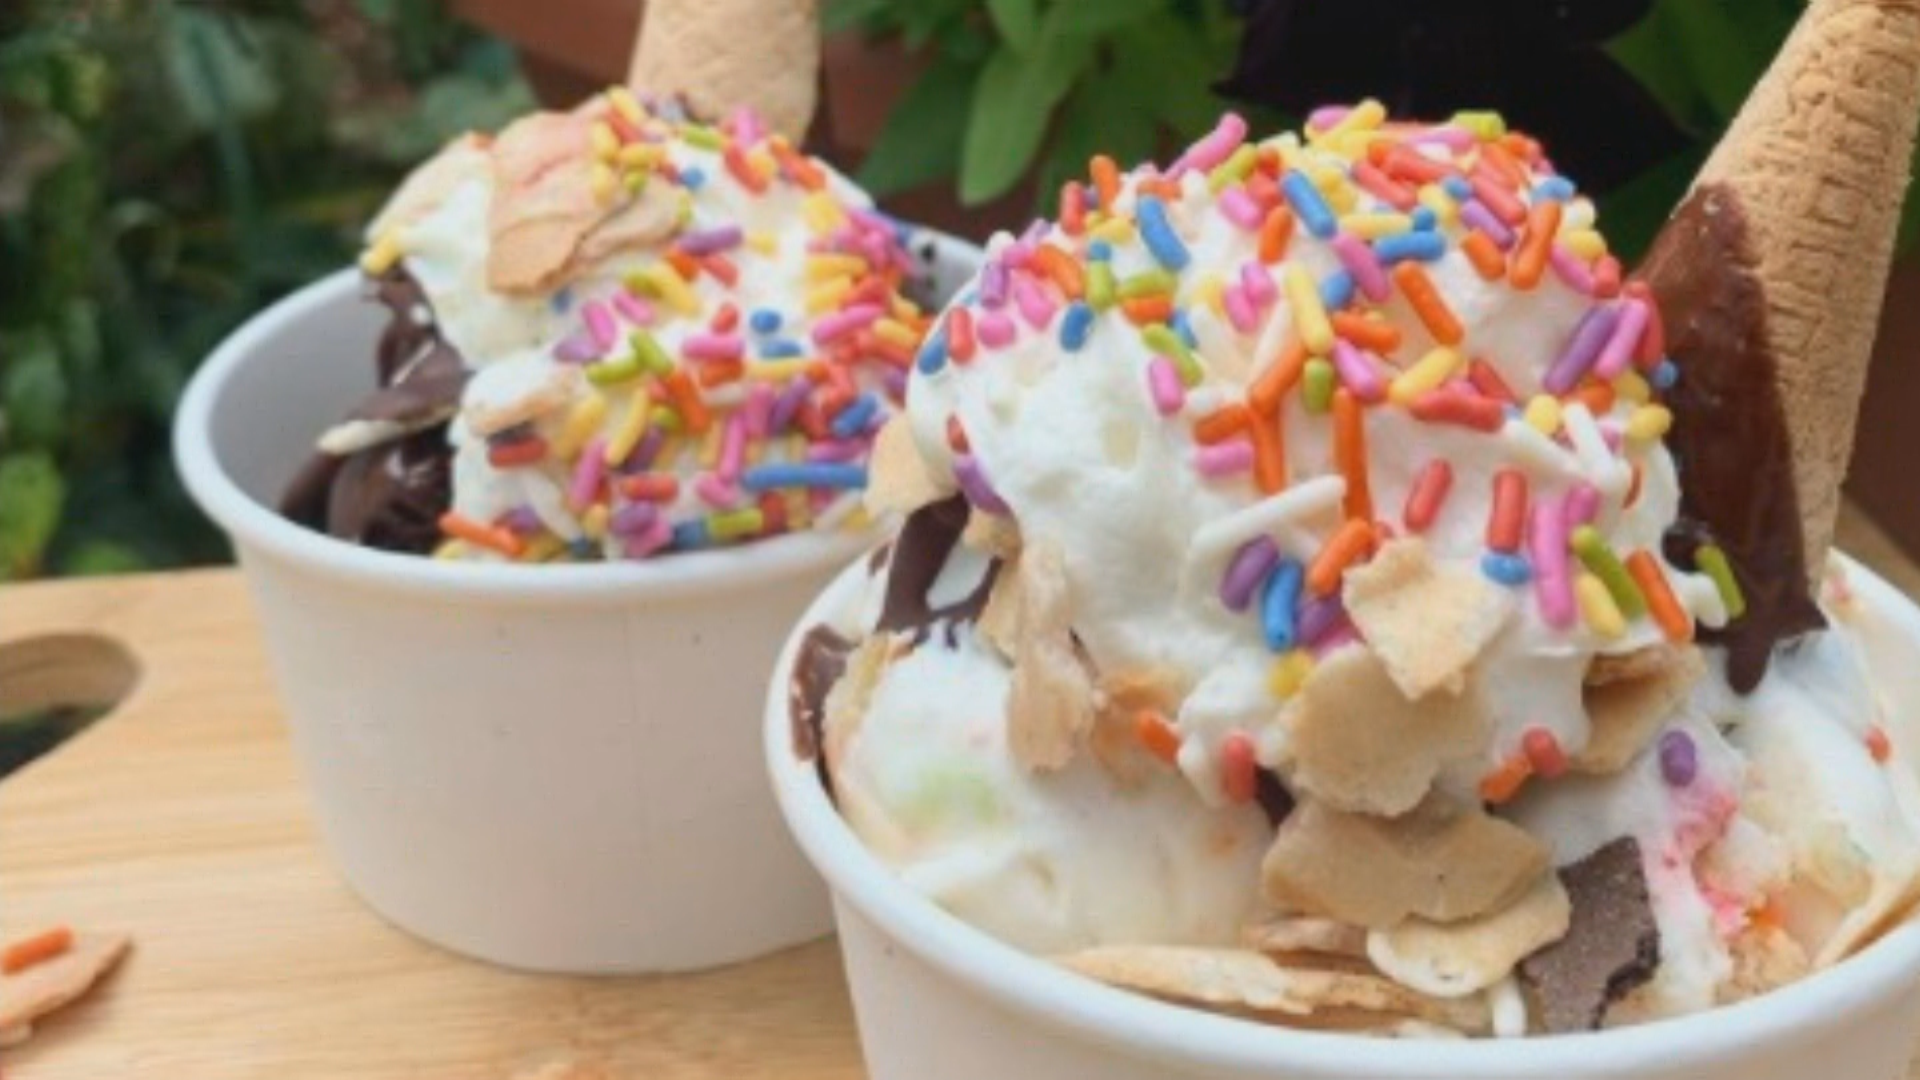 Zsa's Ice Cream In Mount Airy Putting A Unique Spin On Classic Ice Cream Flavors With Locally Sourced Ingredients